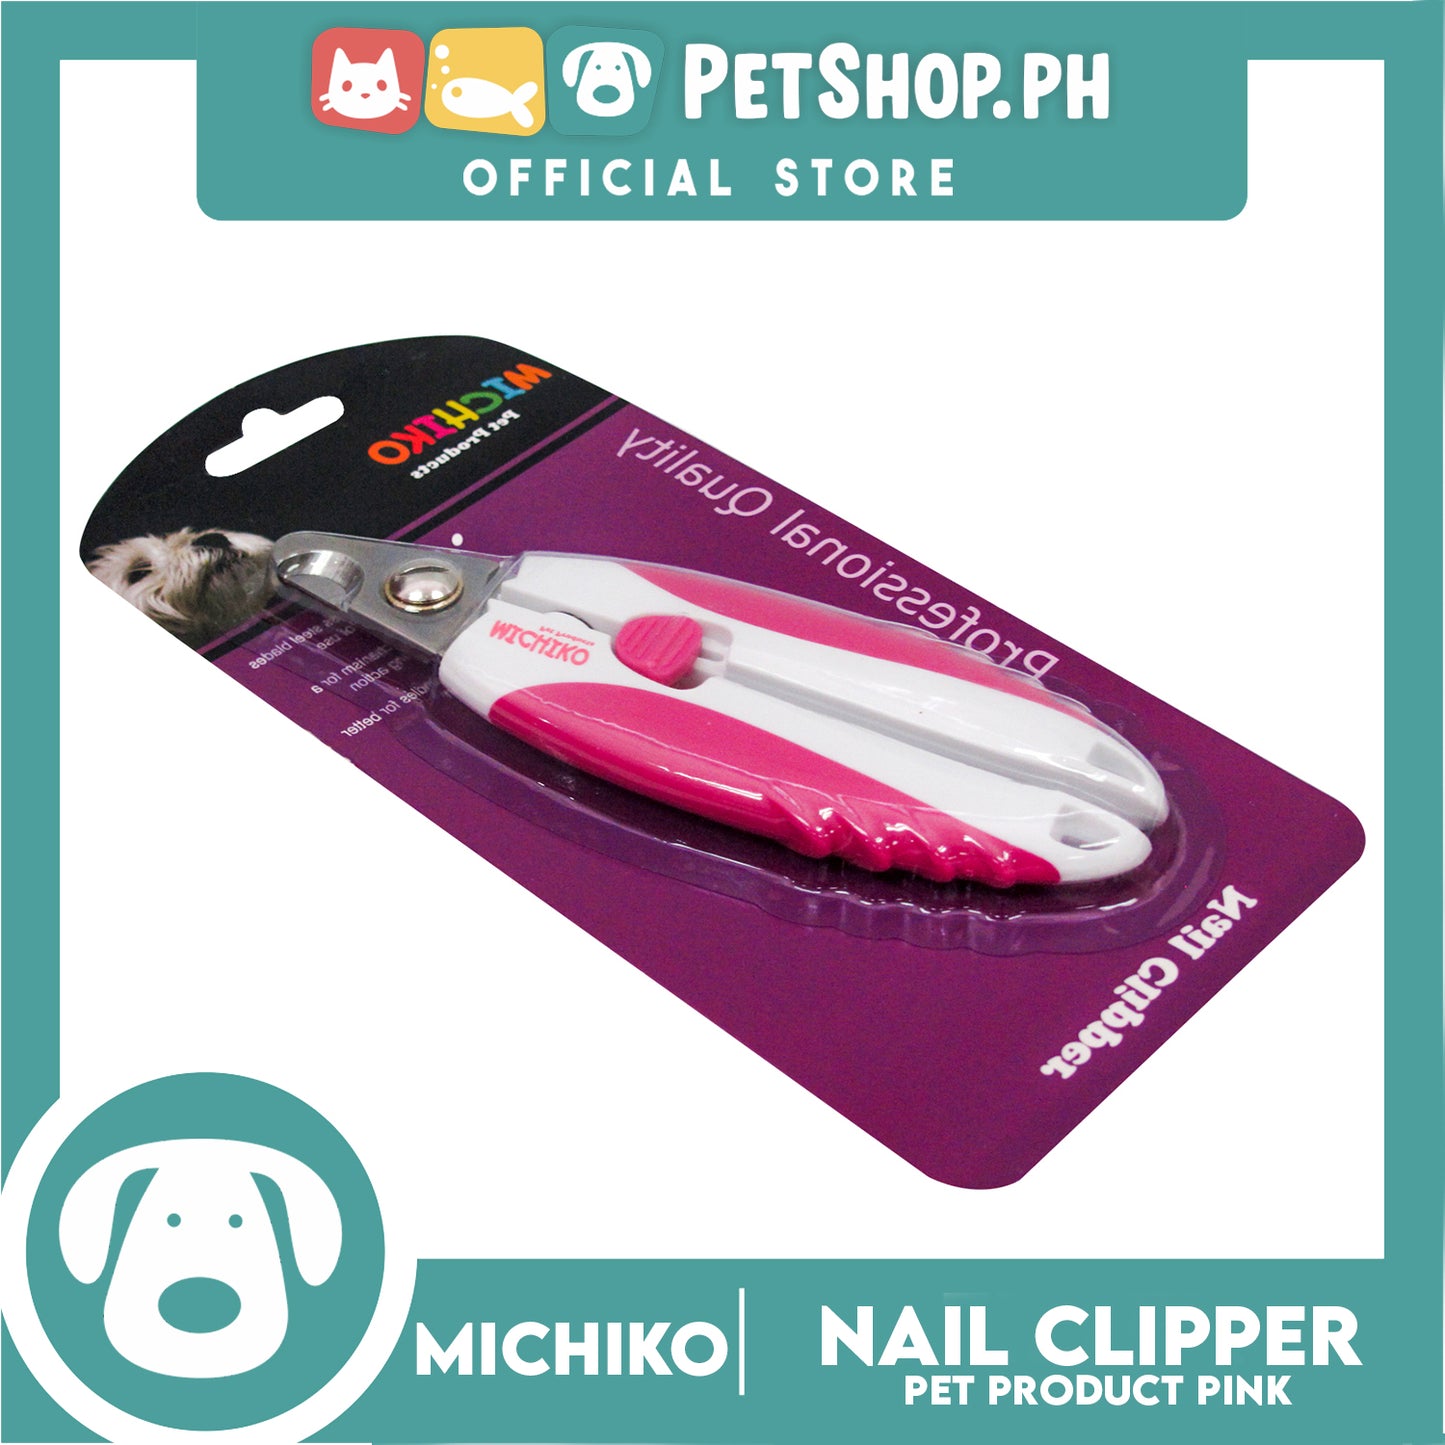 Michiko Premium Pet Nail Clipper Large (Pink) Trimming Nails Grooming For Small Breed Dogs And Cats